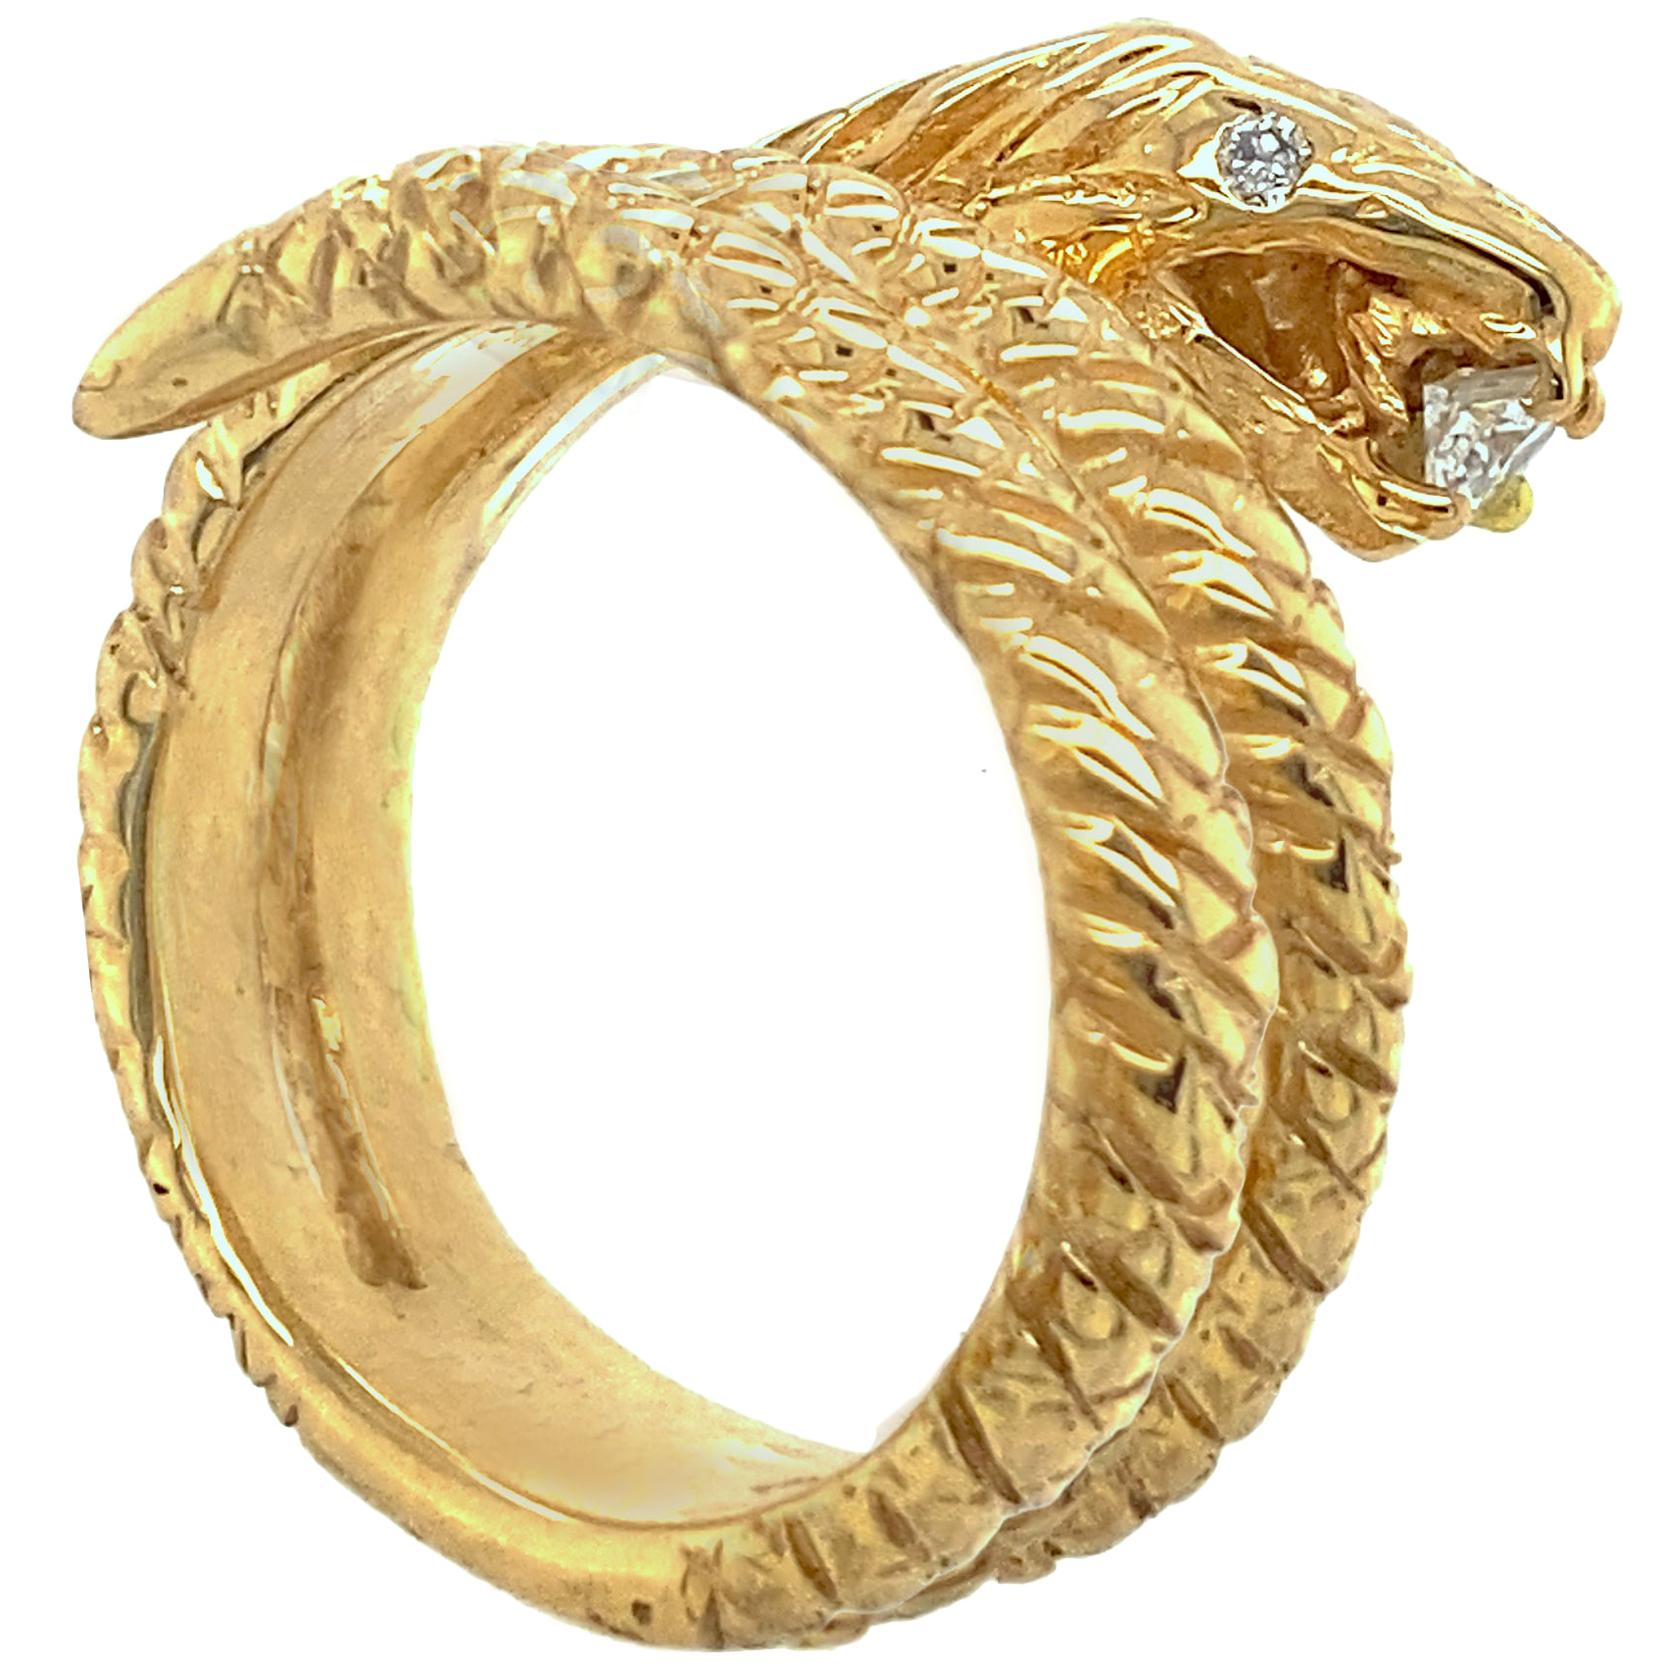 Coiled "Mr. Snake II" Ring in 18 Karat Yellow Gold with Diamond Eyes and Snack